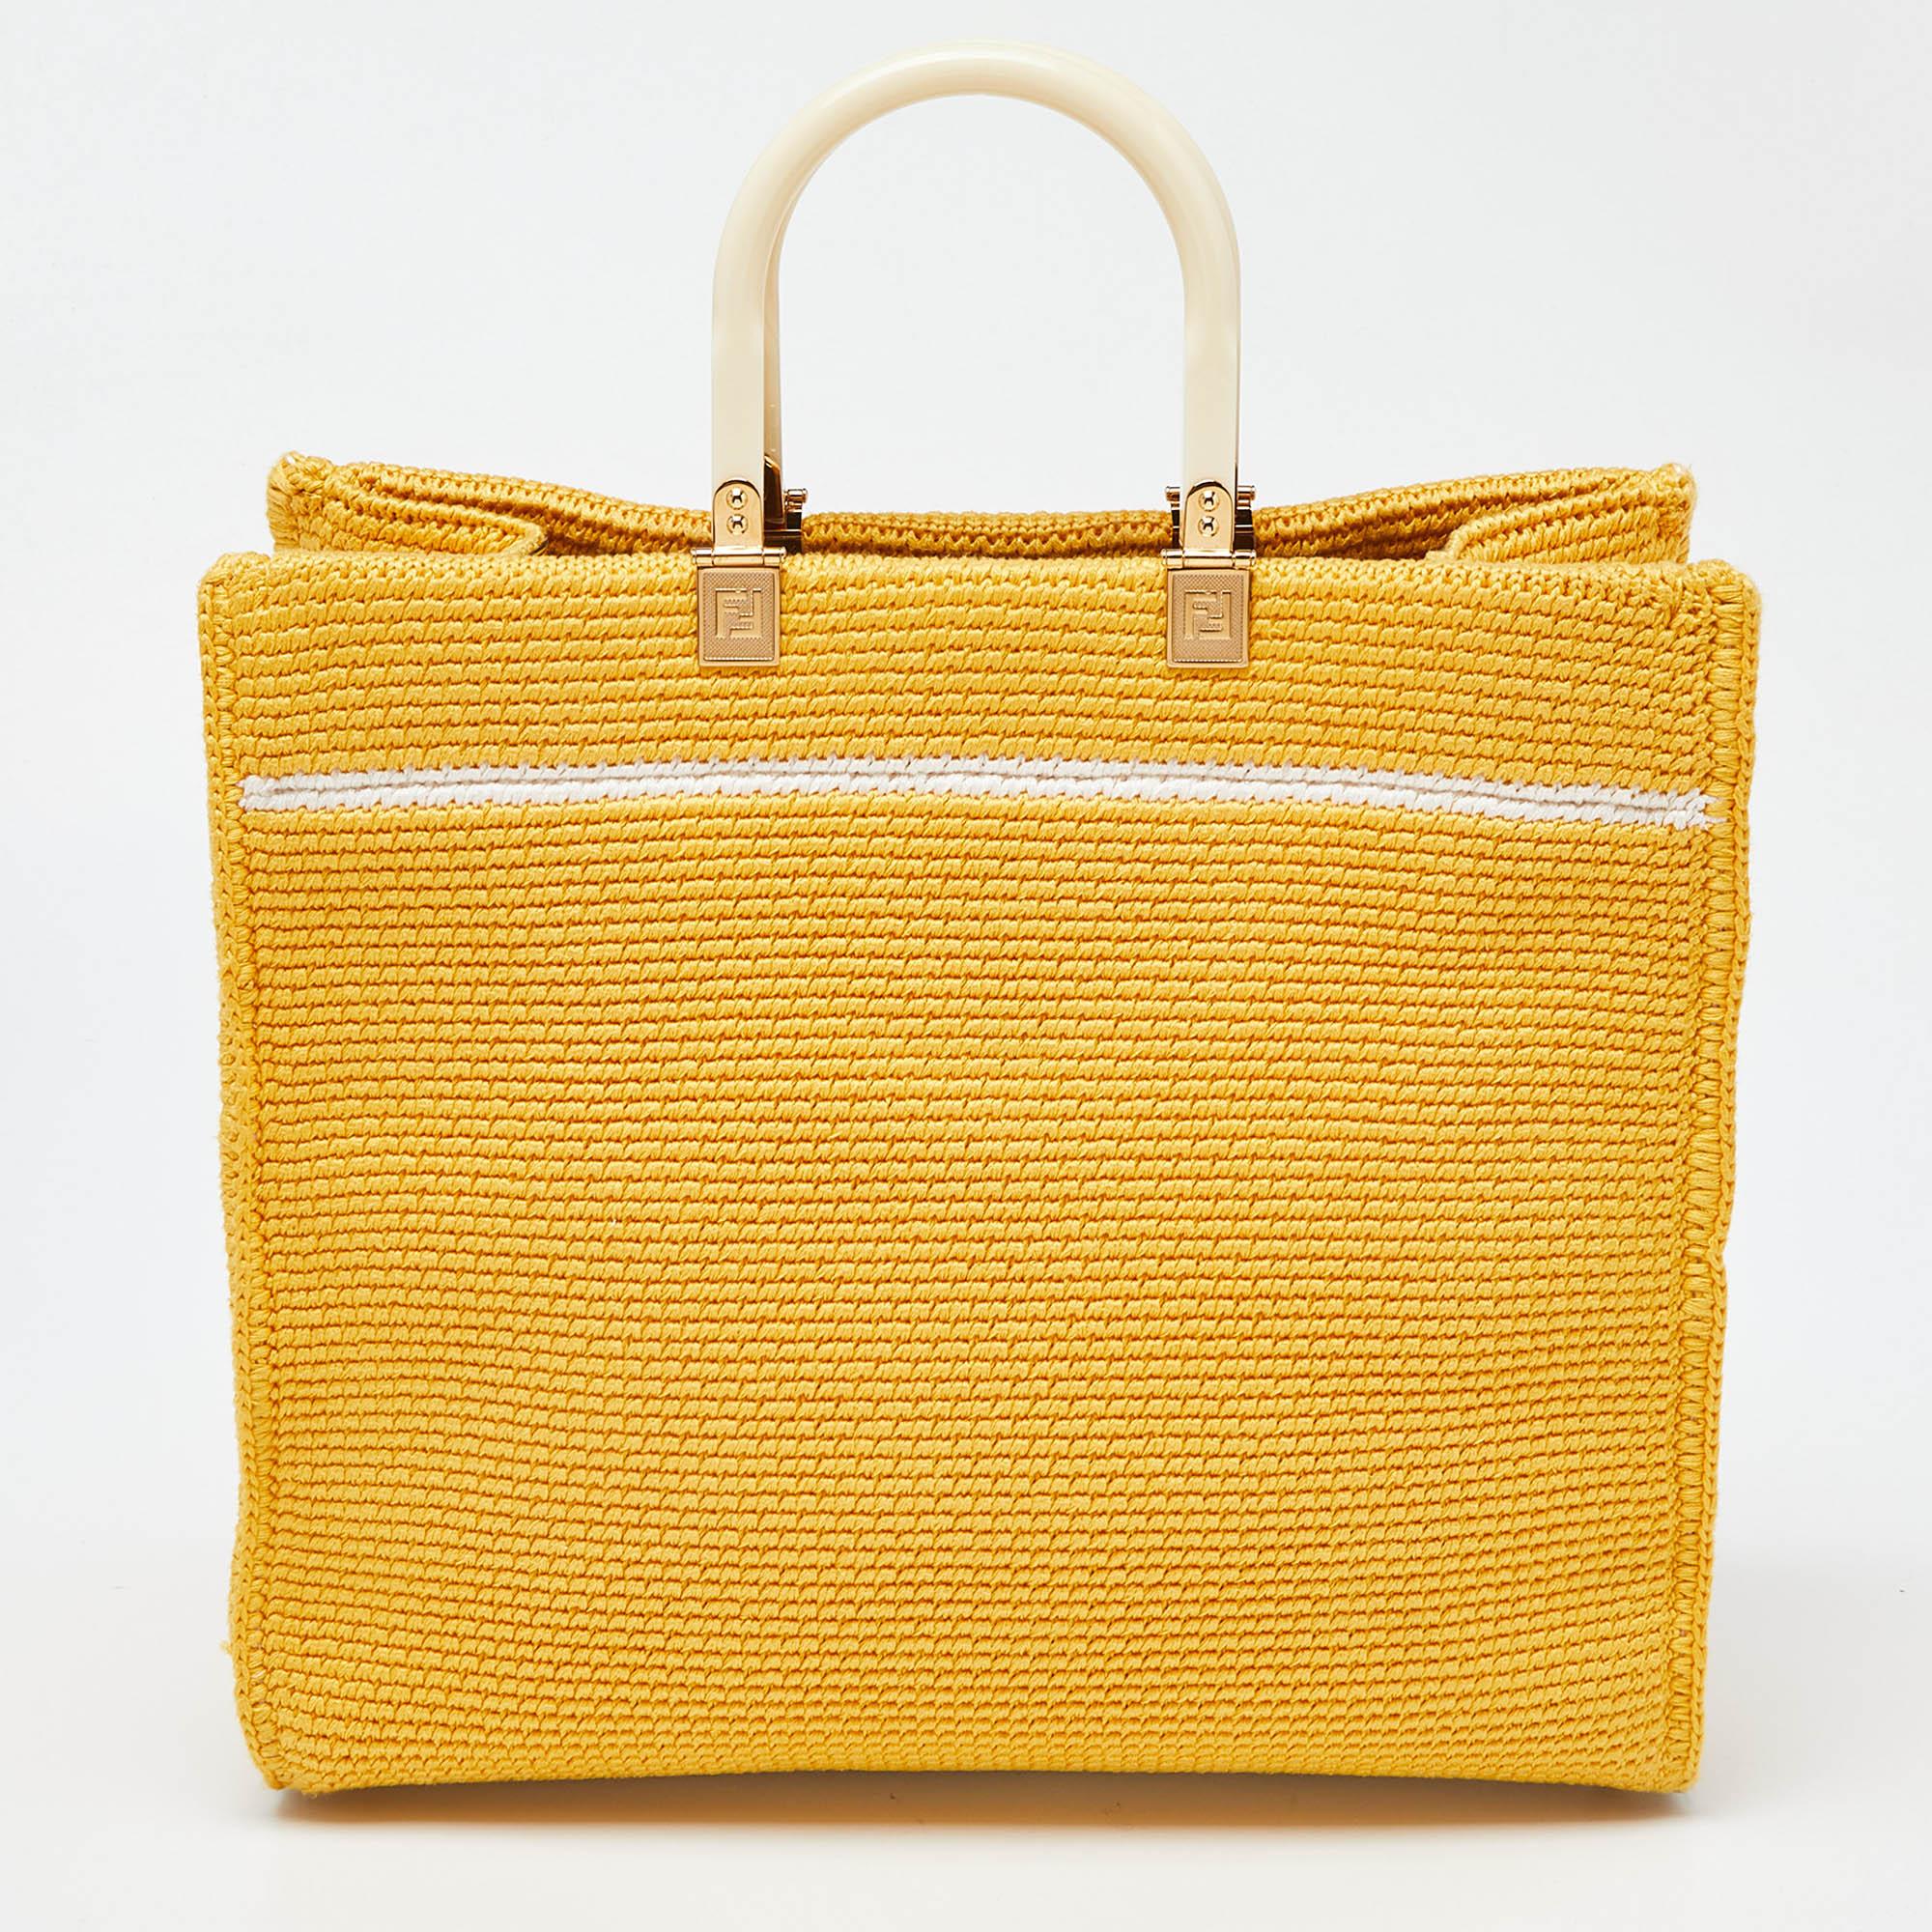 The Fendi Sunshine Tote is a luxurious and versatile handbag. Crafted from supple crochet and leather, it features a spacious interior. The iconic Fendi logo is on the front, and the bag is adorned with elegant gold-tone hardware. A detachable